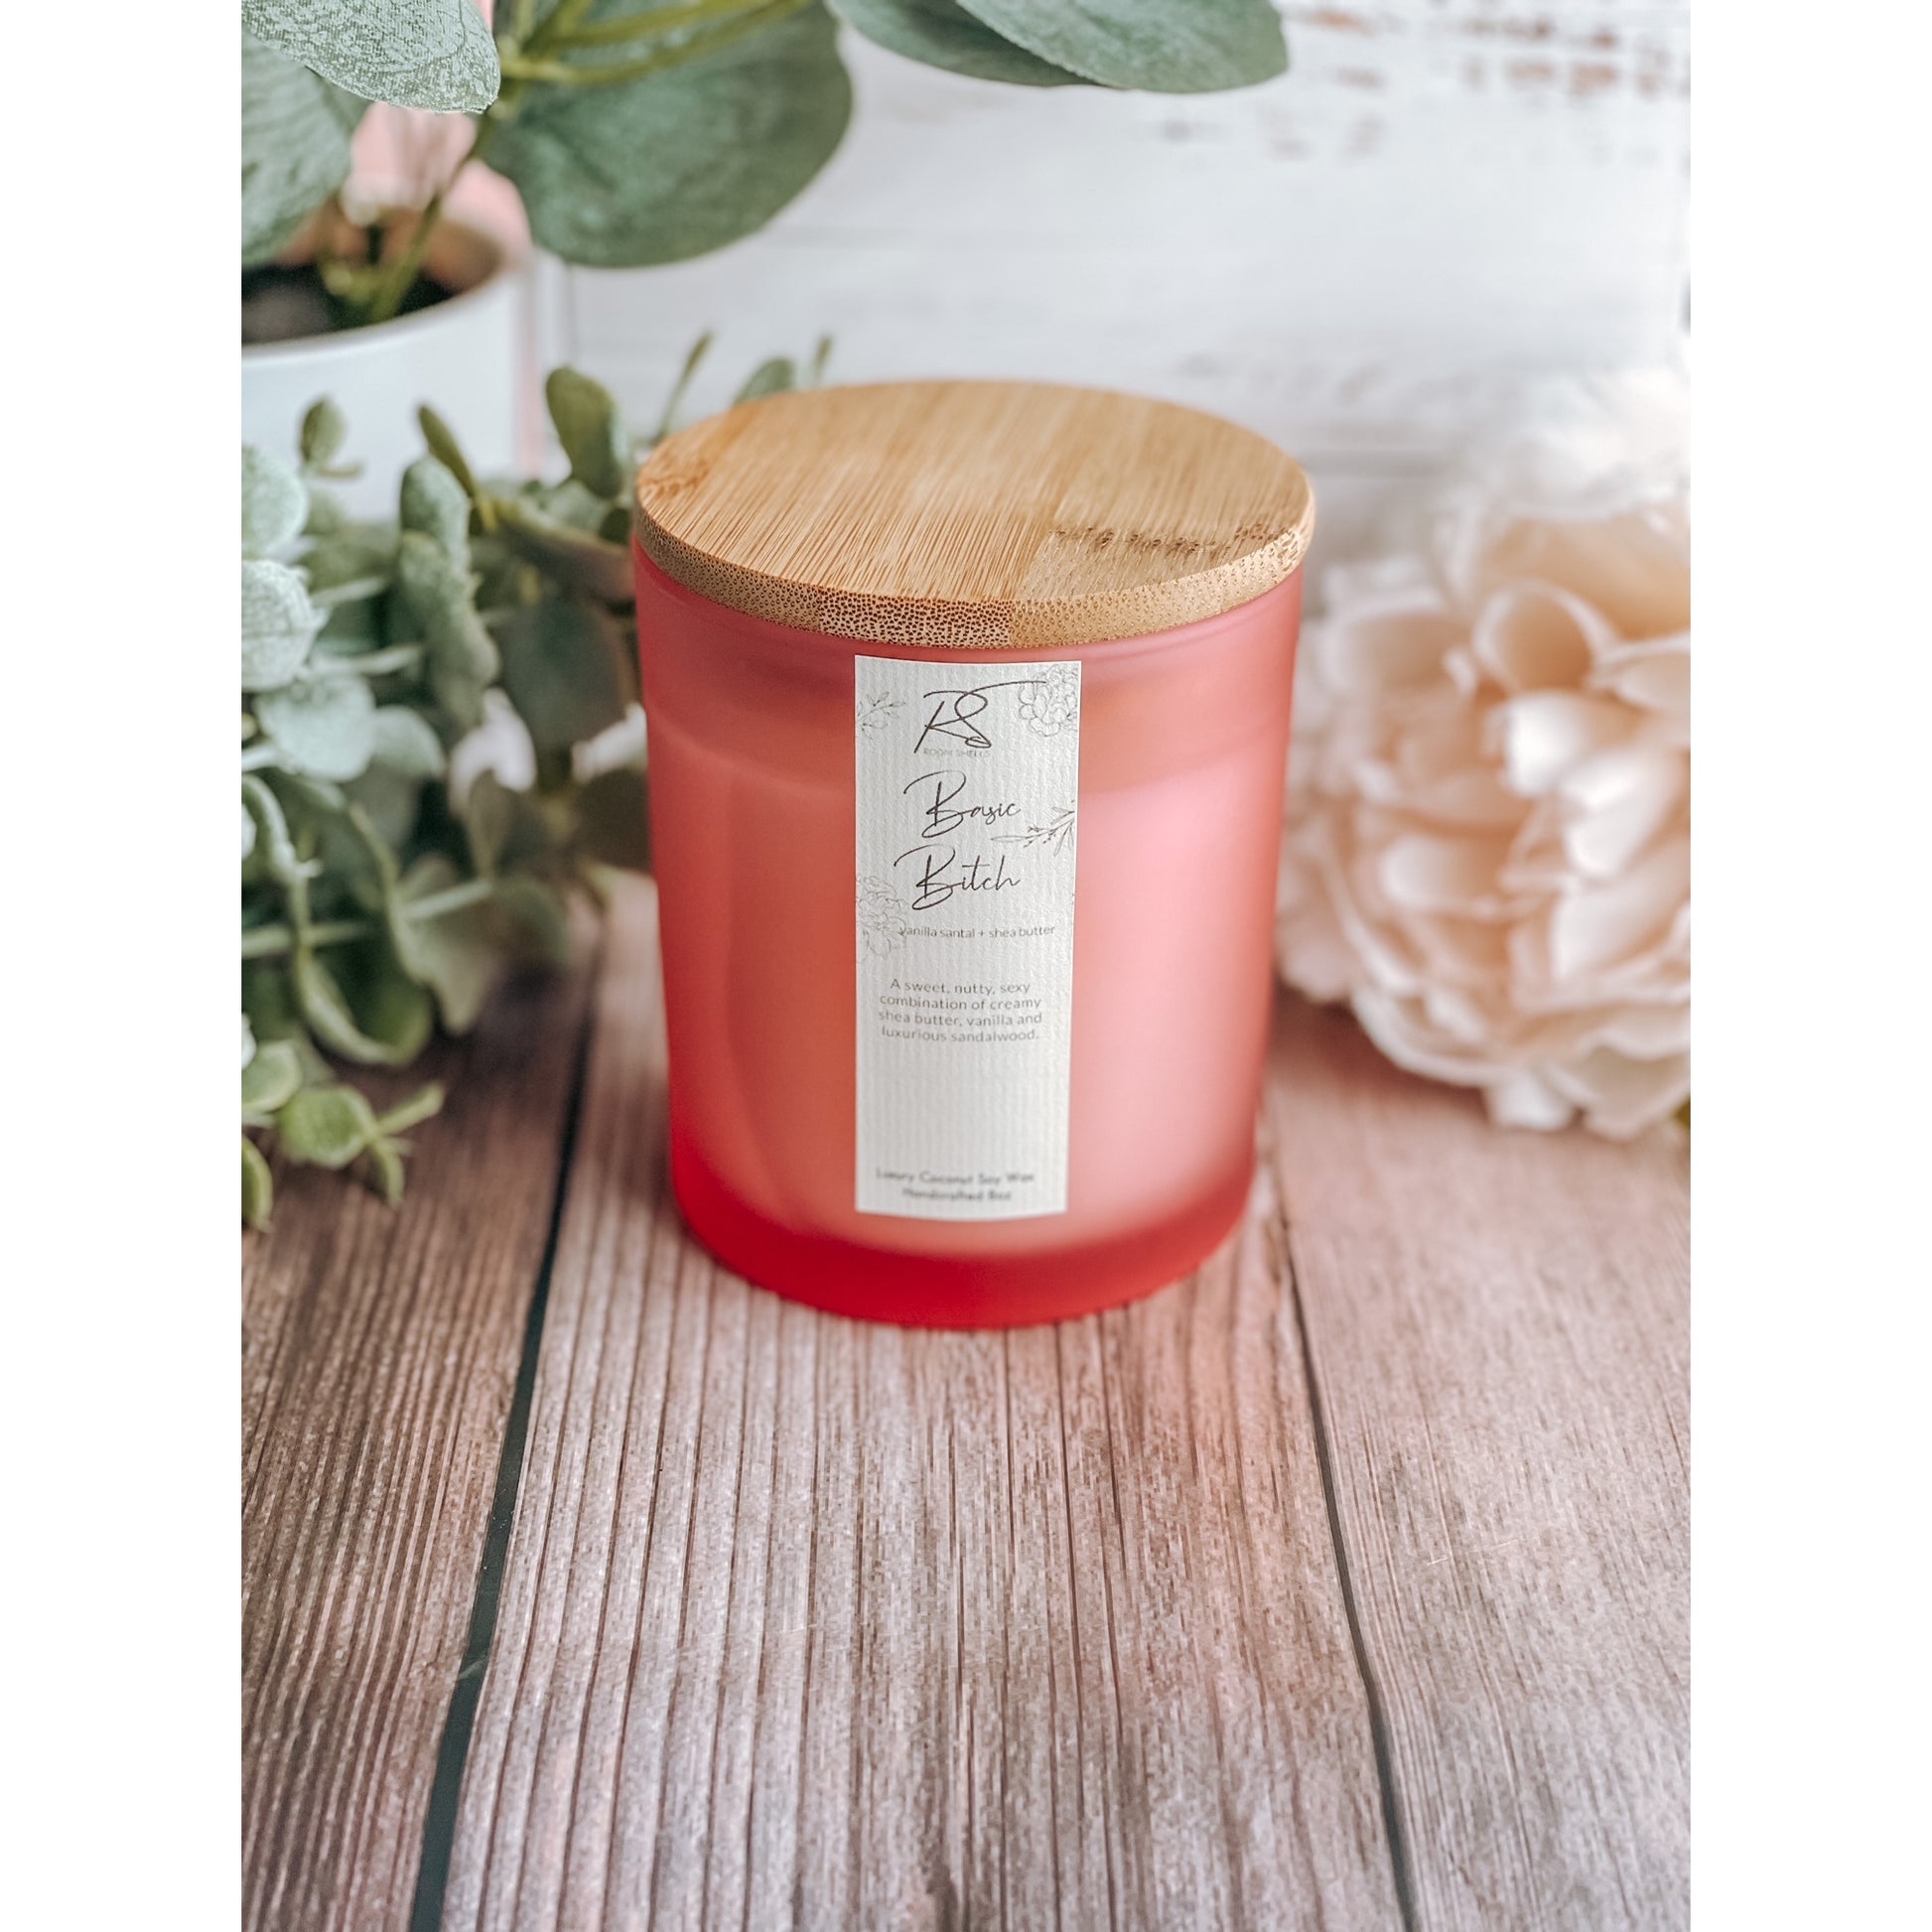 Basic Bitch - Luxury Coconut Soy Wax Handcrafted Candle - 8-oz - Mellow Monkey